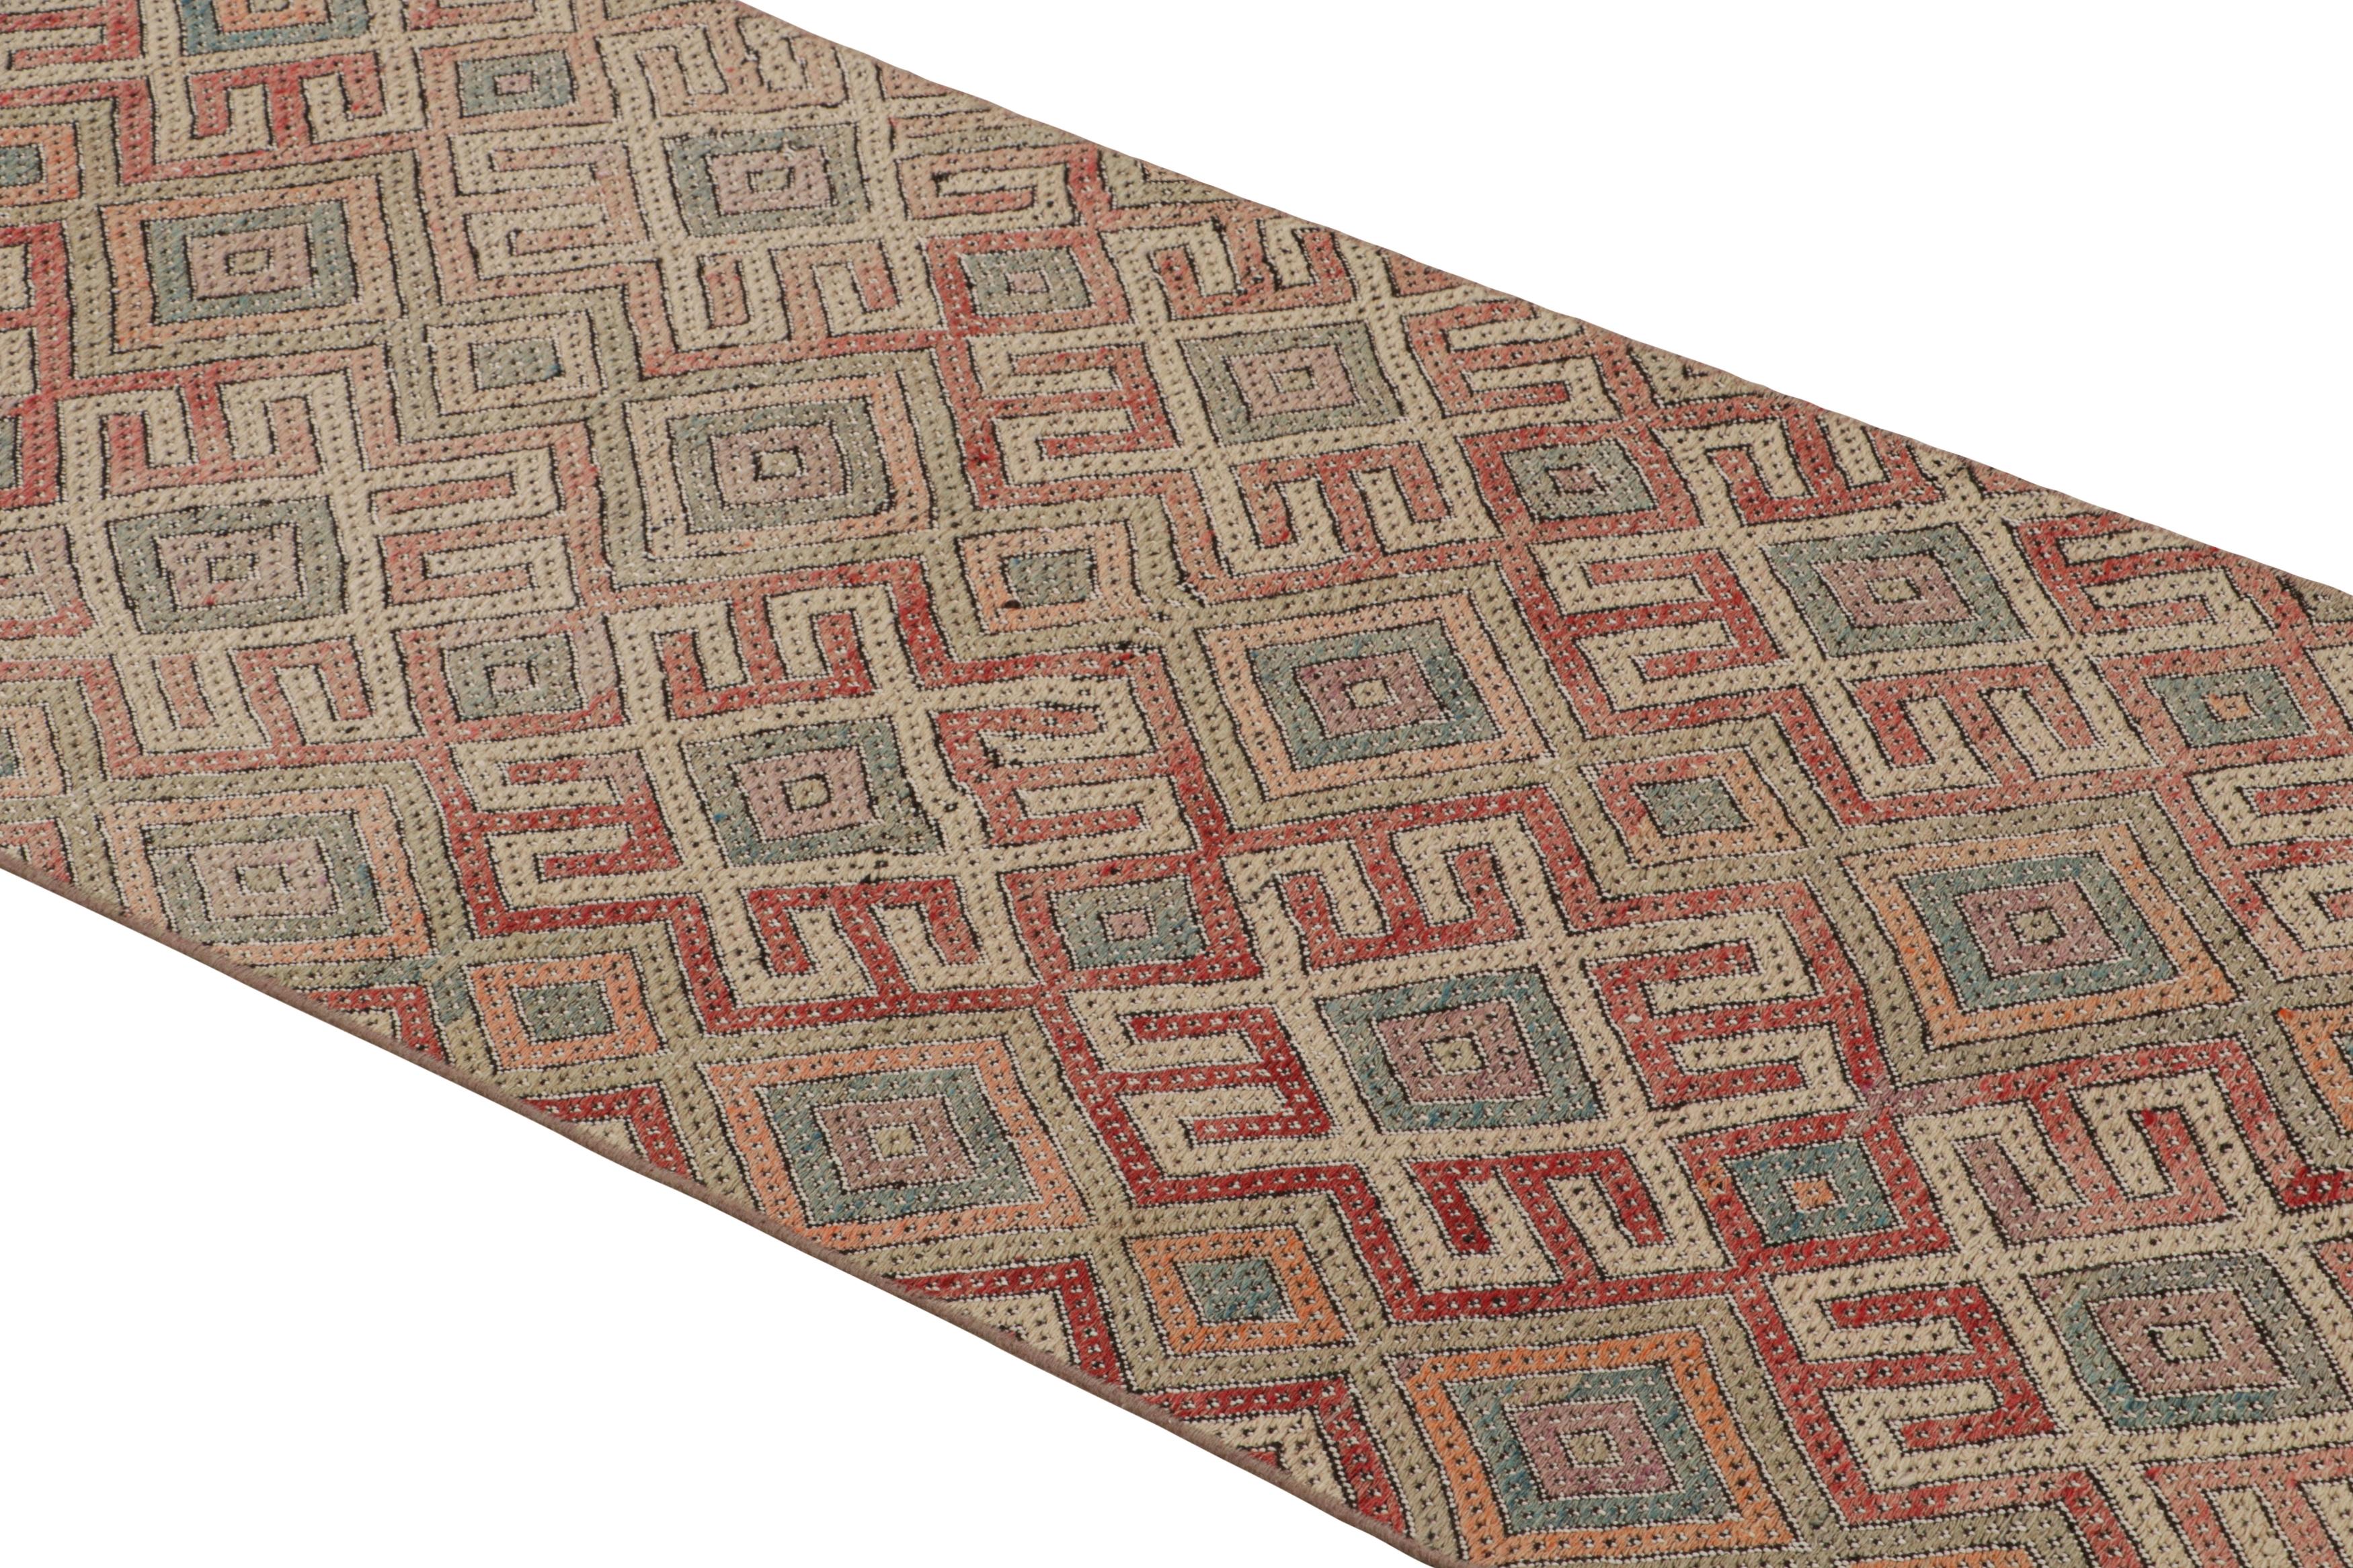 Handwoven in Turkey originating between 1950-1960, this vintage midcentury wool Kilim runner enjoys a meticulous play of embroidery and flat weaving, uncommon and distinguishing of a select line from our recent additions to our collections. The